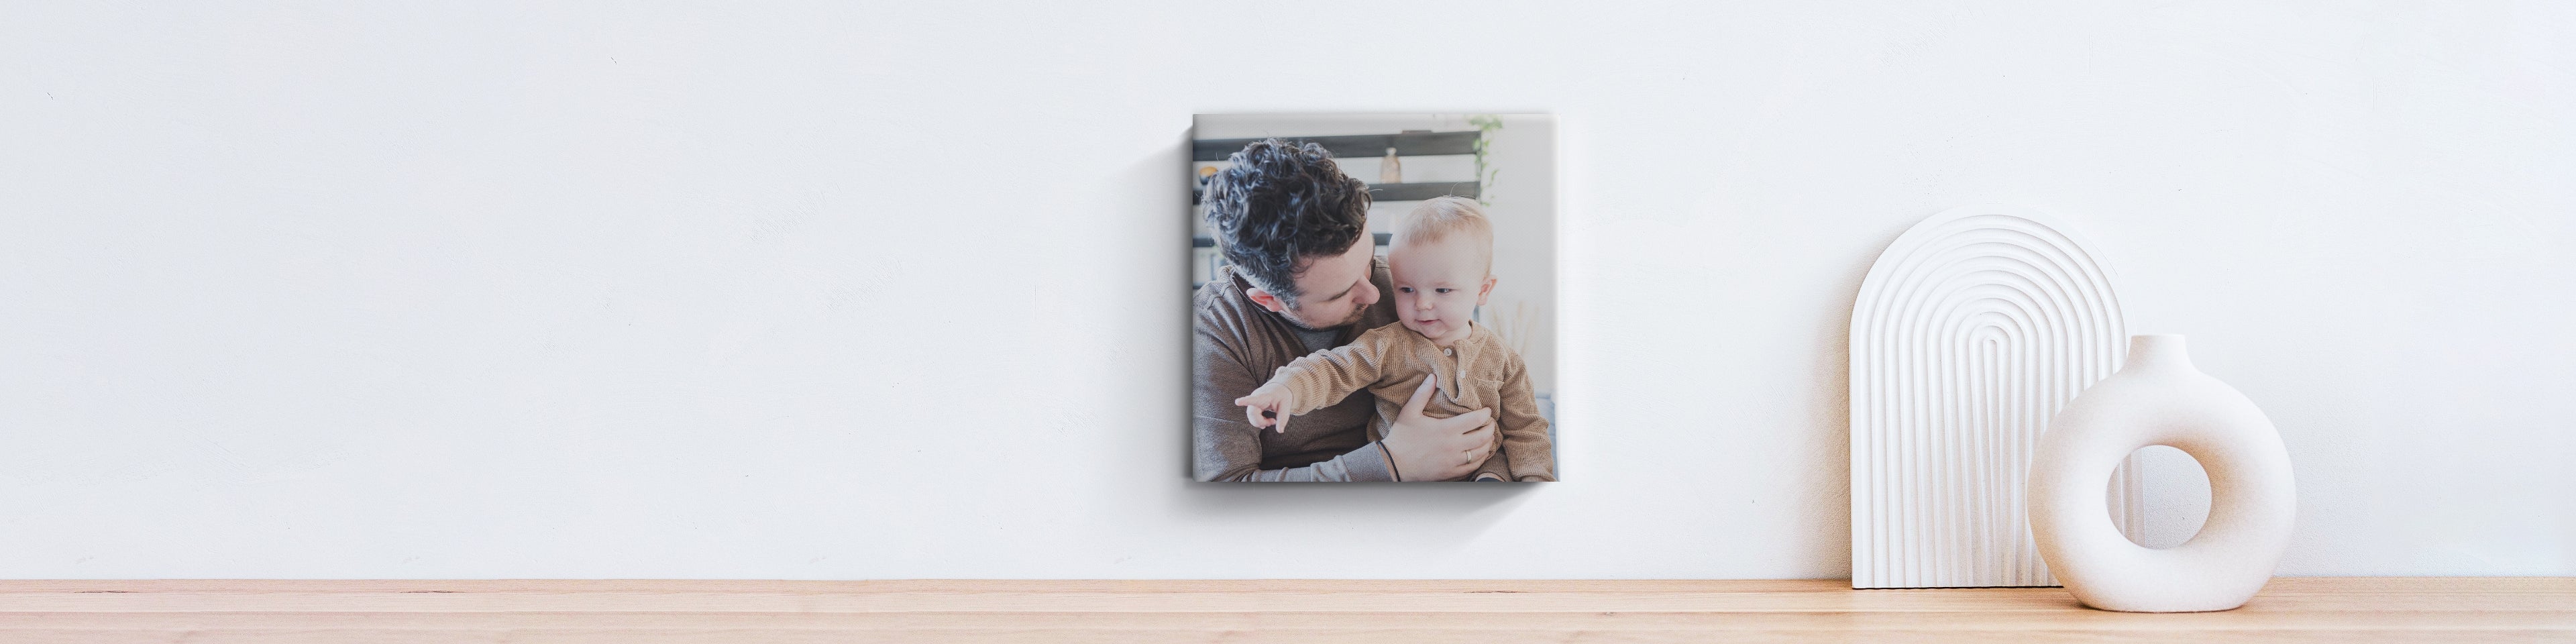 Personalised photo frames and prints